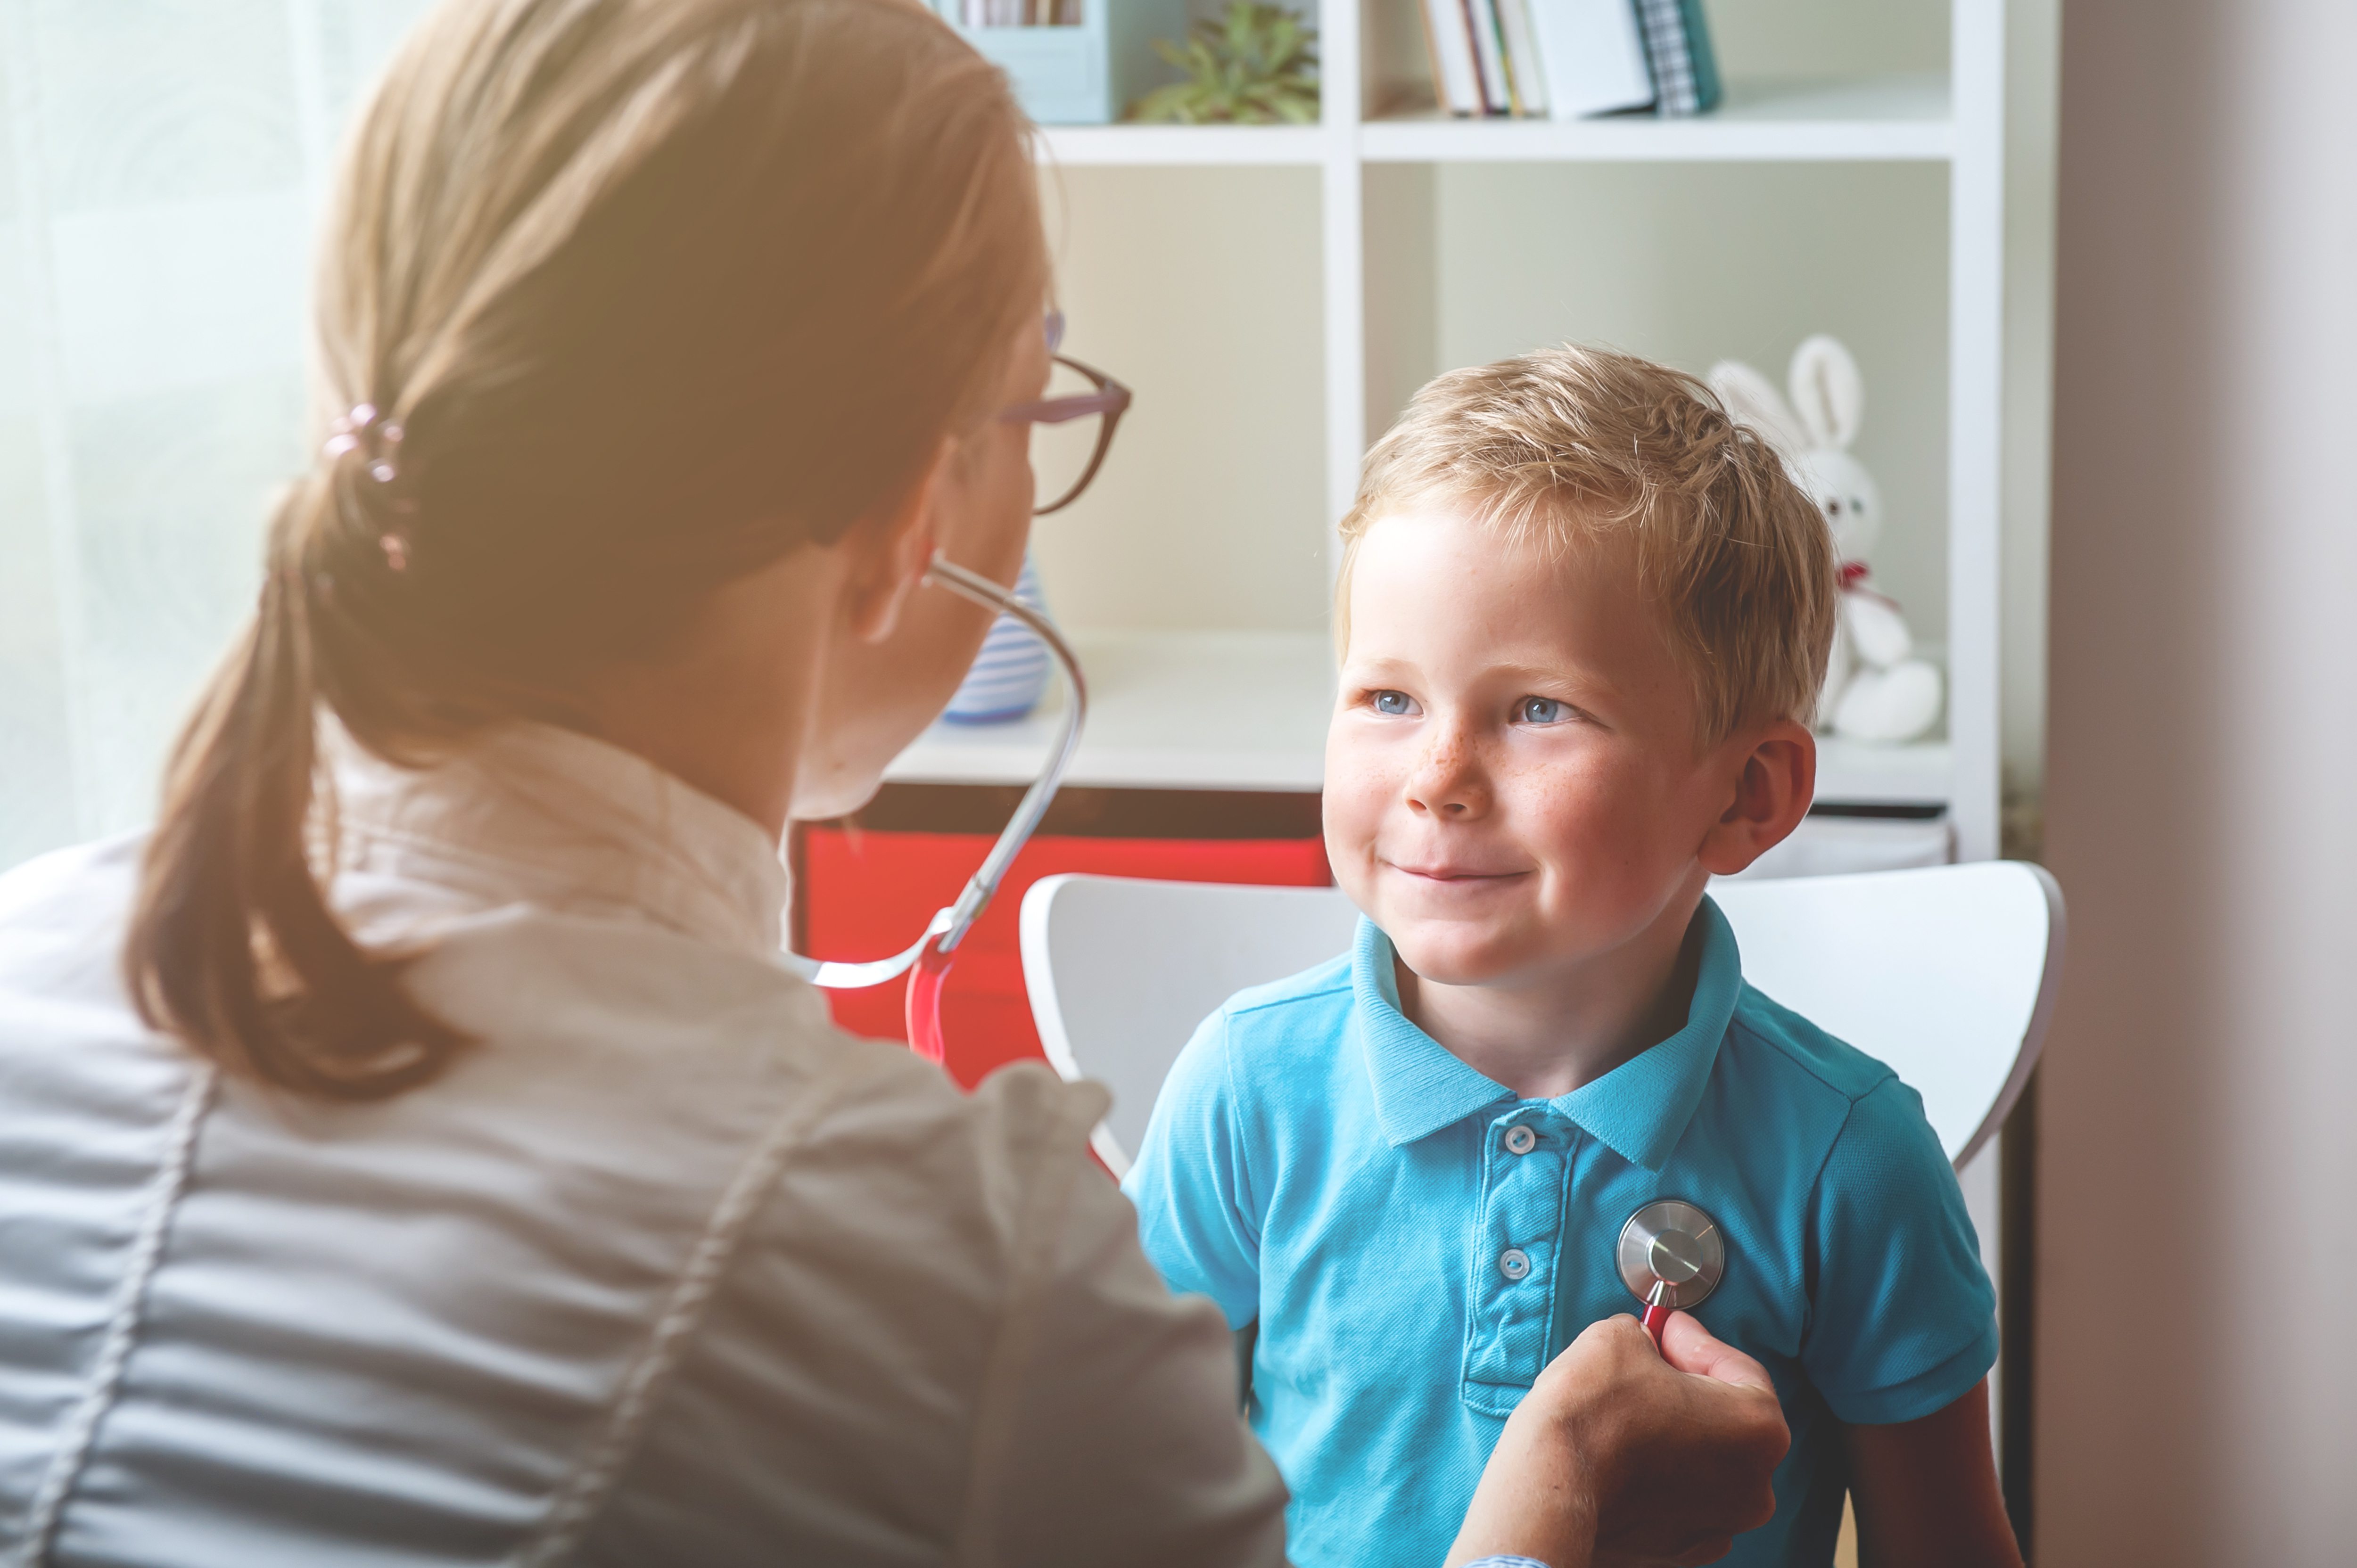 TheraCare Provides Outpatient Pediatric Care in Springfield MO